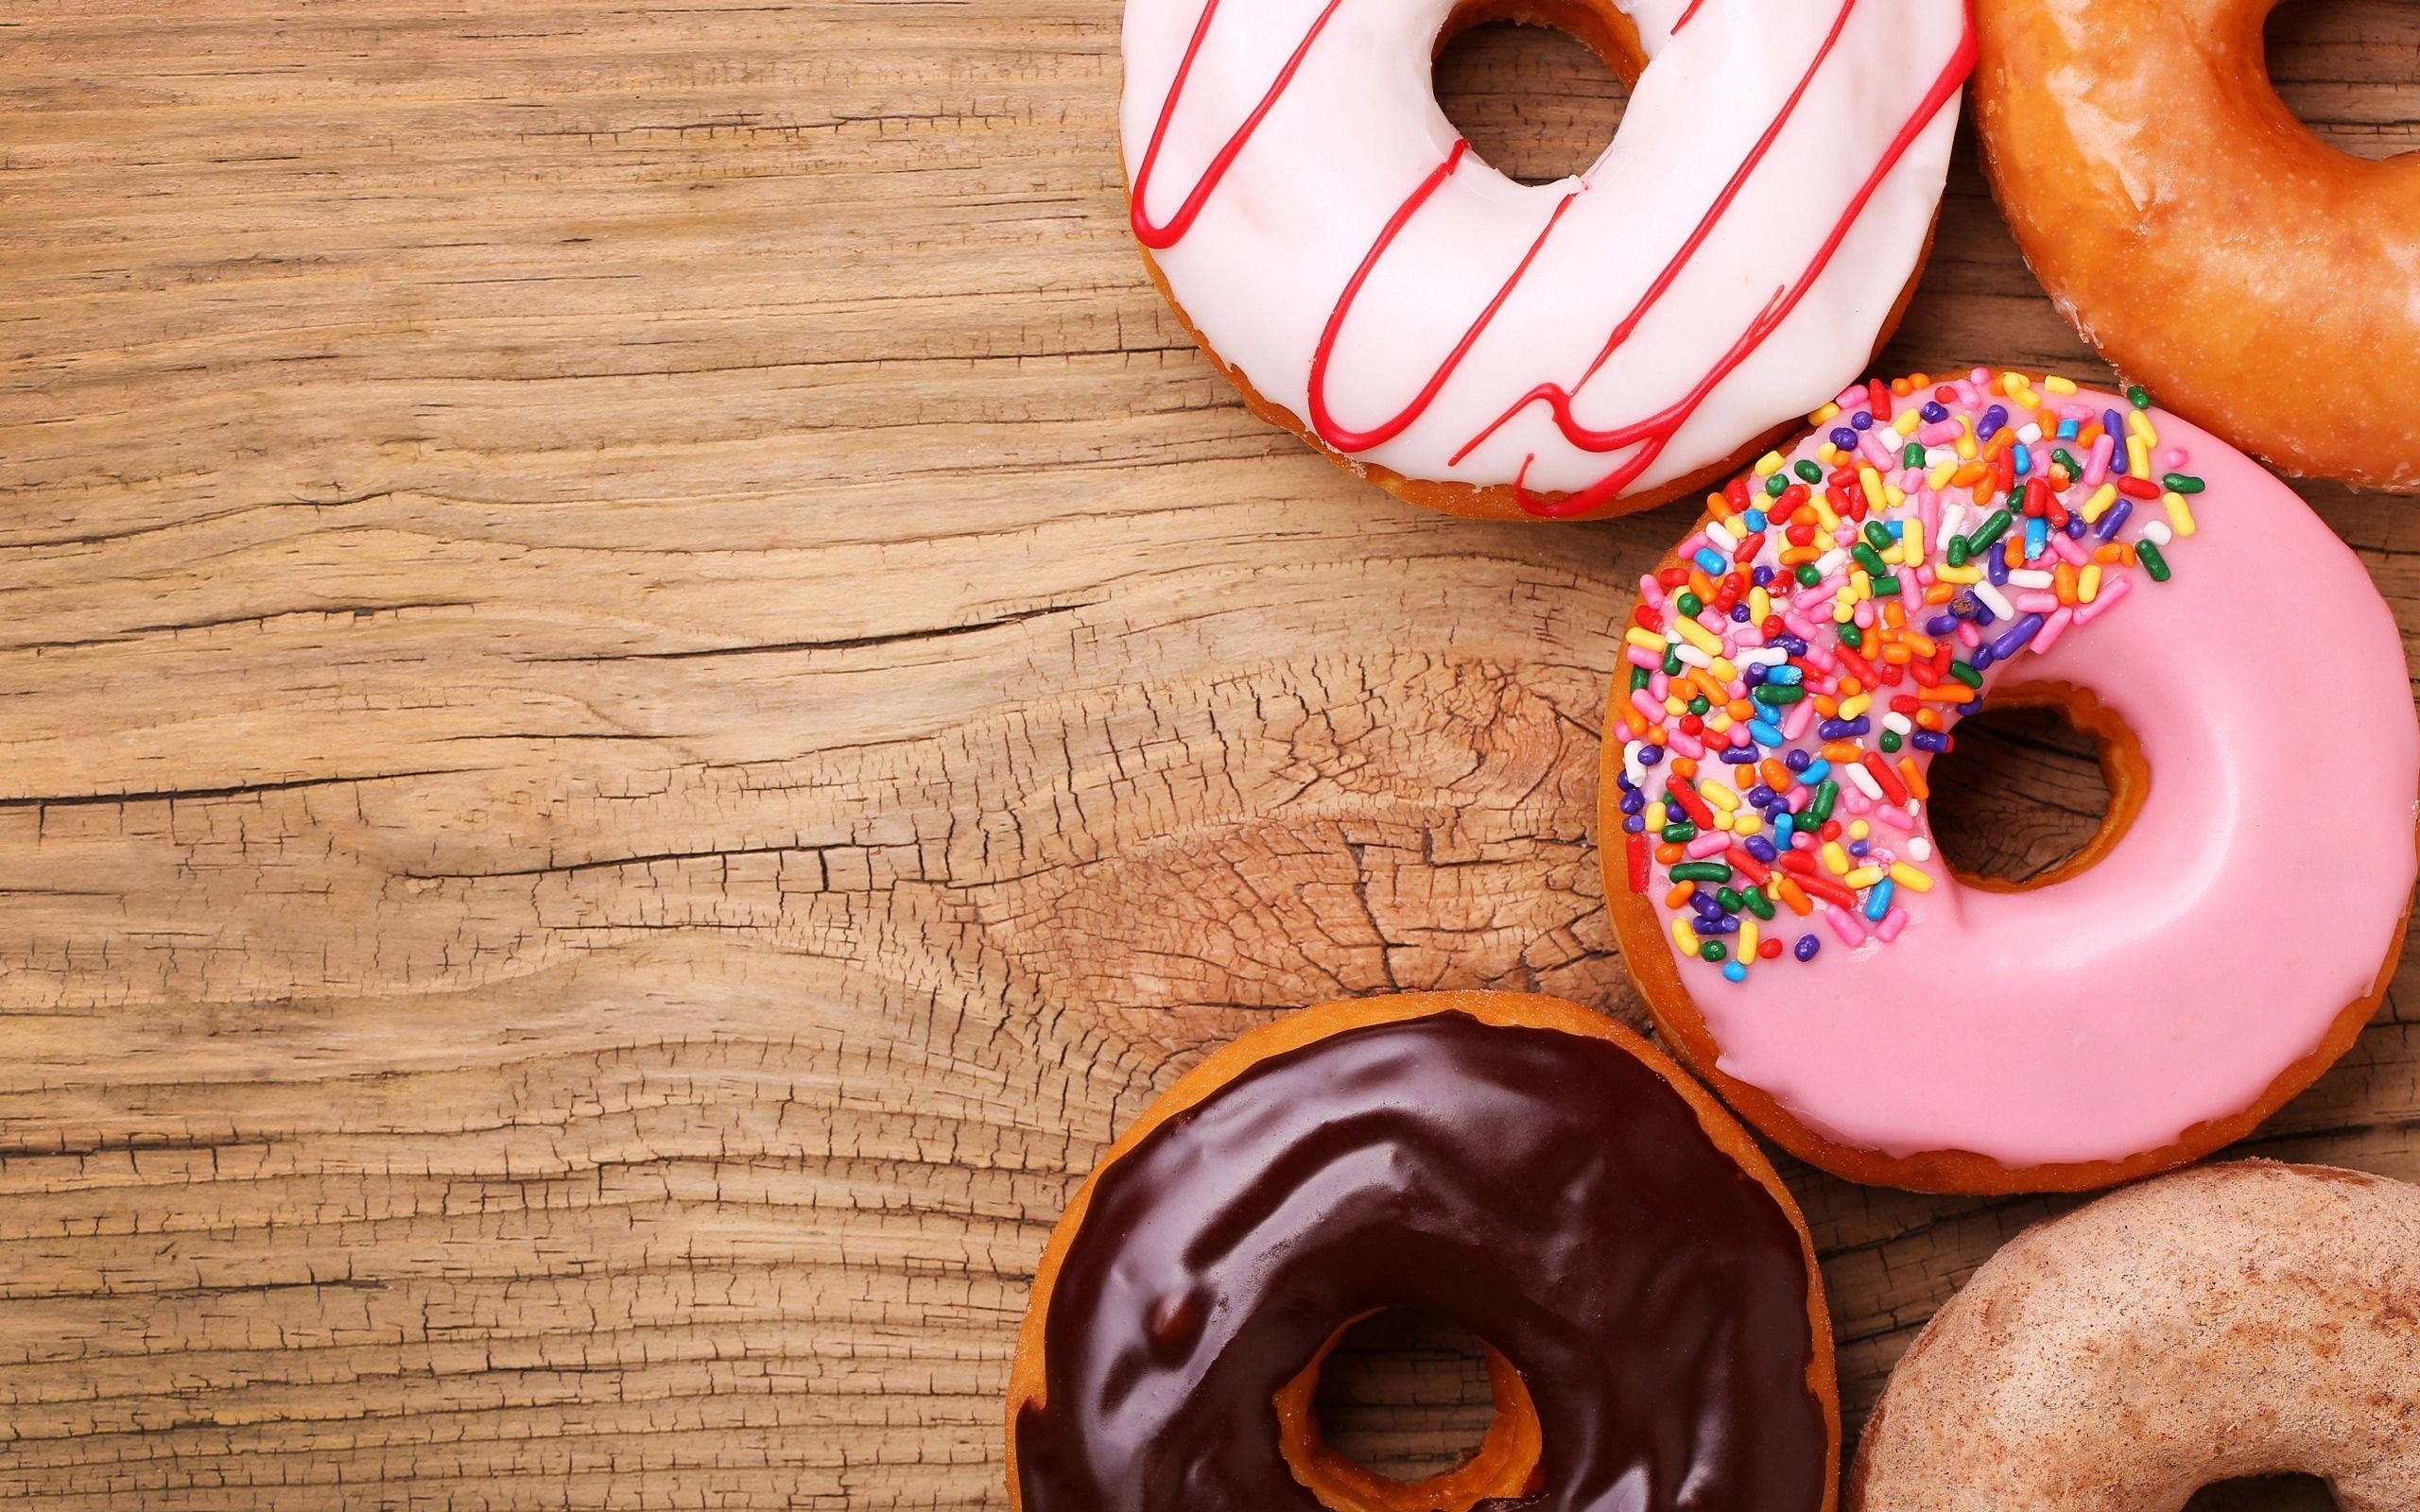  Download Dunkin Donuts Wallpaper Top Background by briantorres 